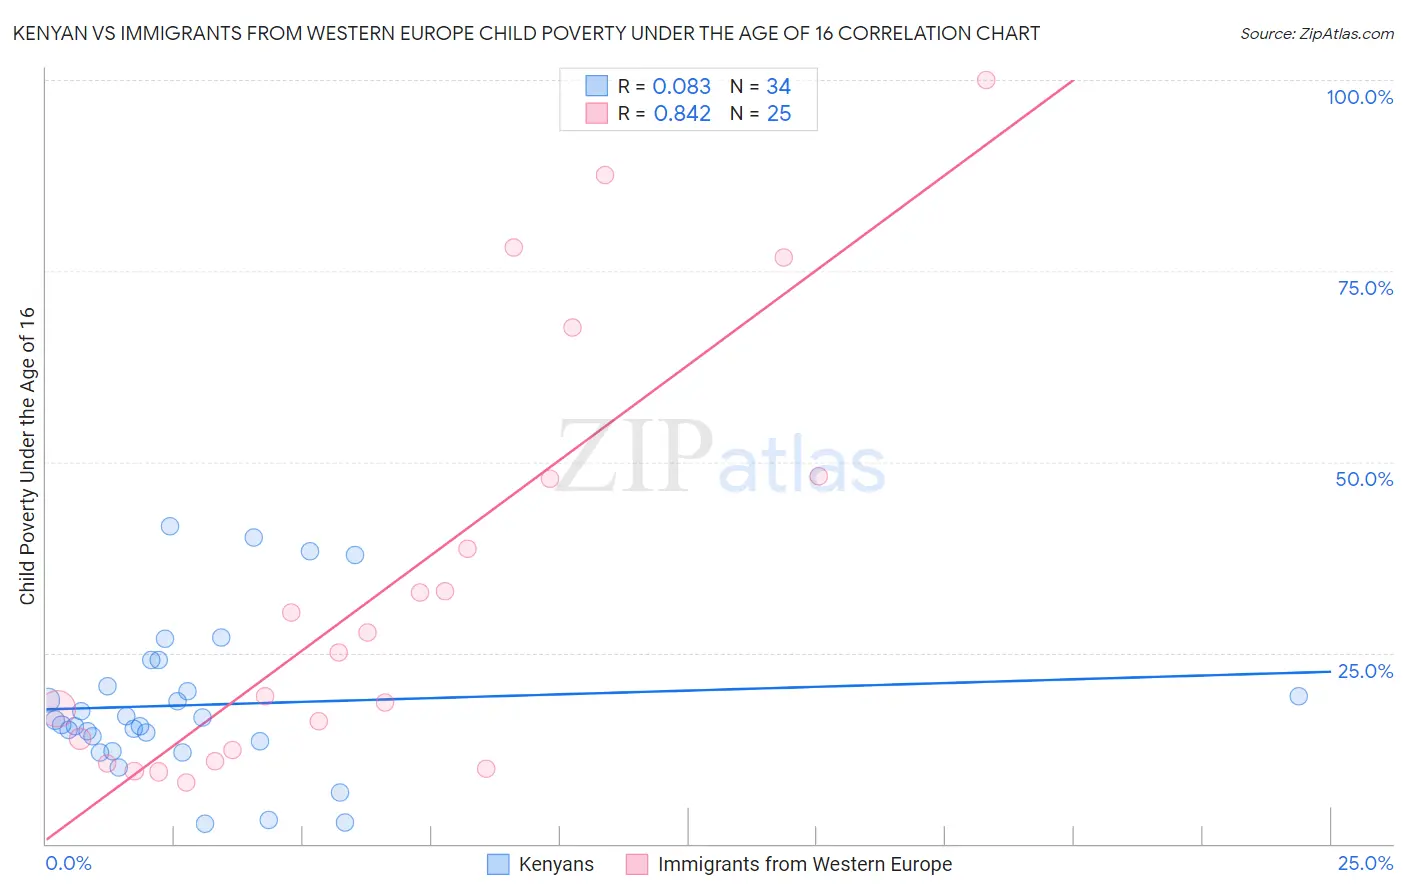 Kenyan vs Immigrants from Western Europe Child Poverty Under the Age of 16